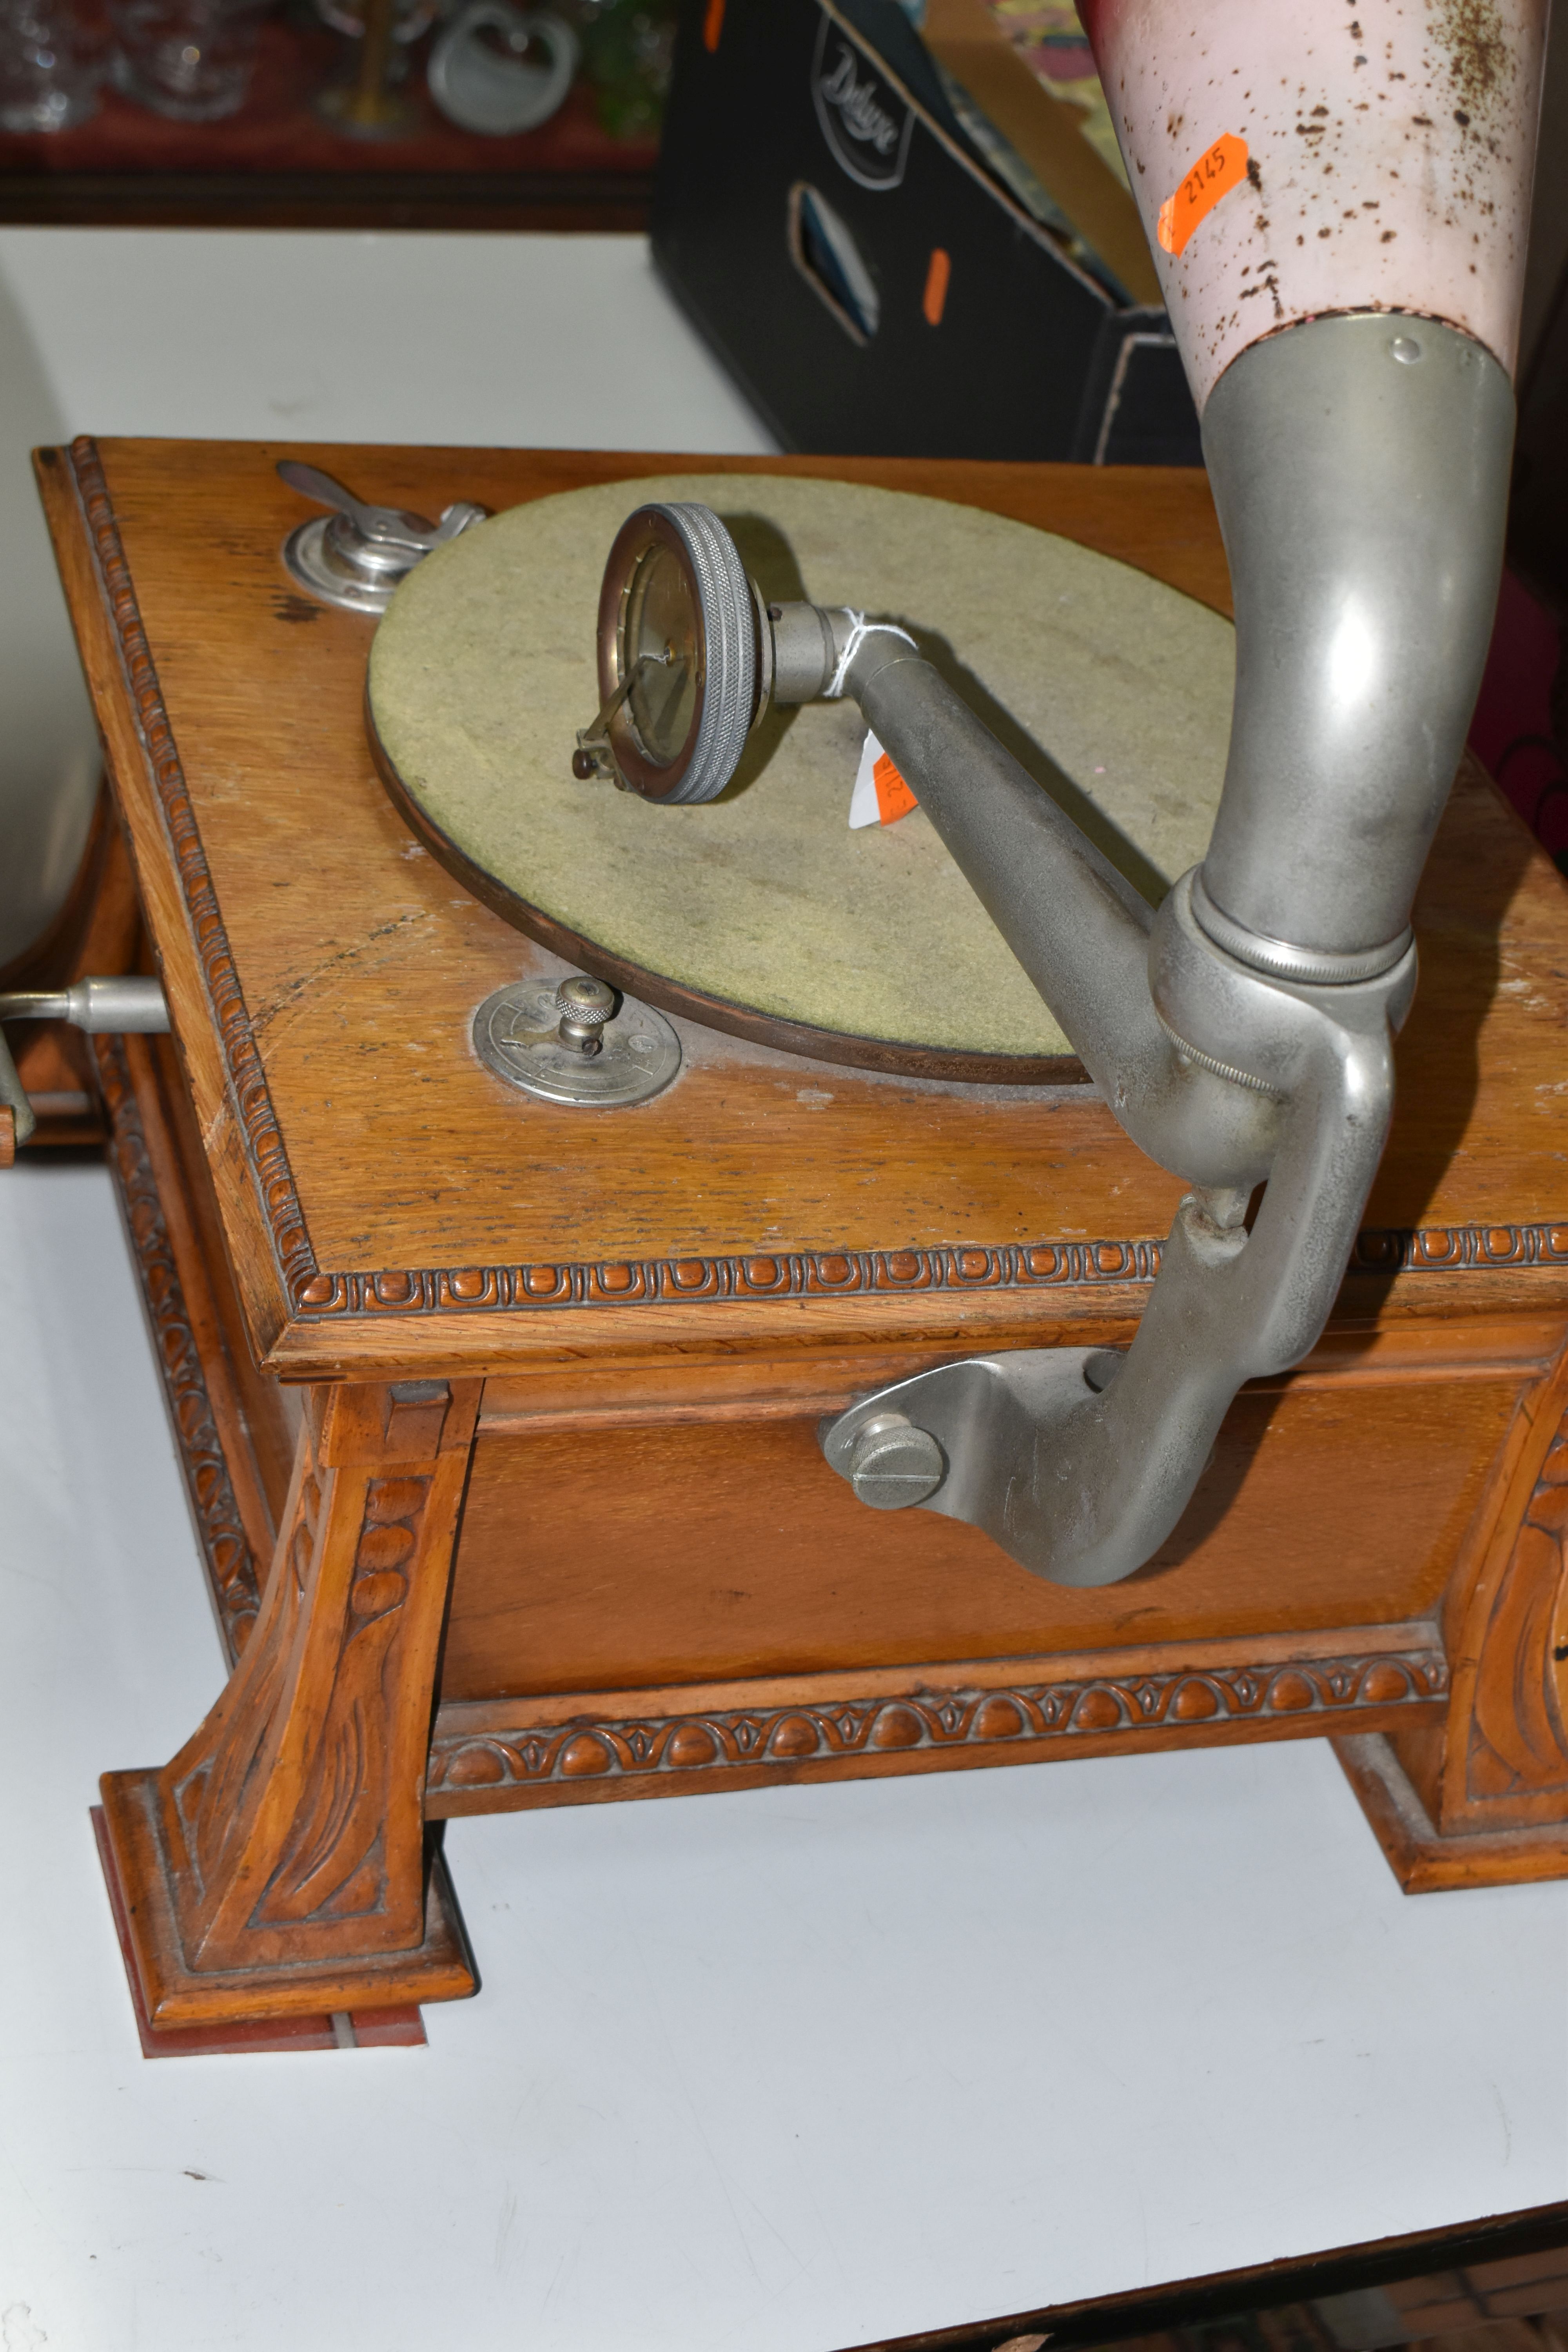 AN EARLY 20TH CENTURY PALE OAK PARLOPHONE TABLE TOP GRAMOPHONE, with moulded edges and on splayed - Image 9 of 10